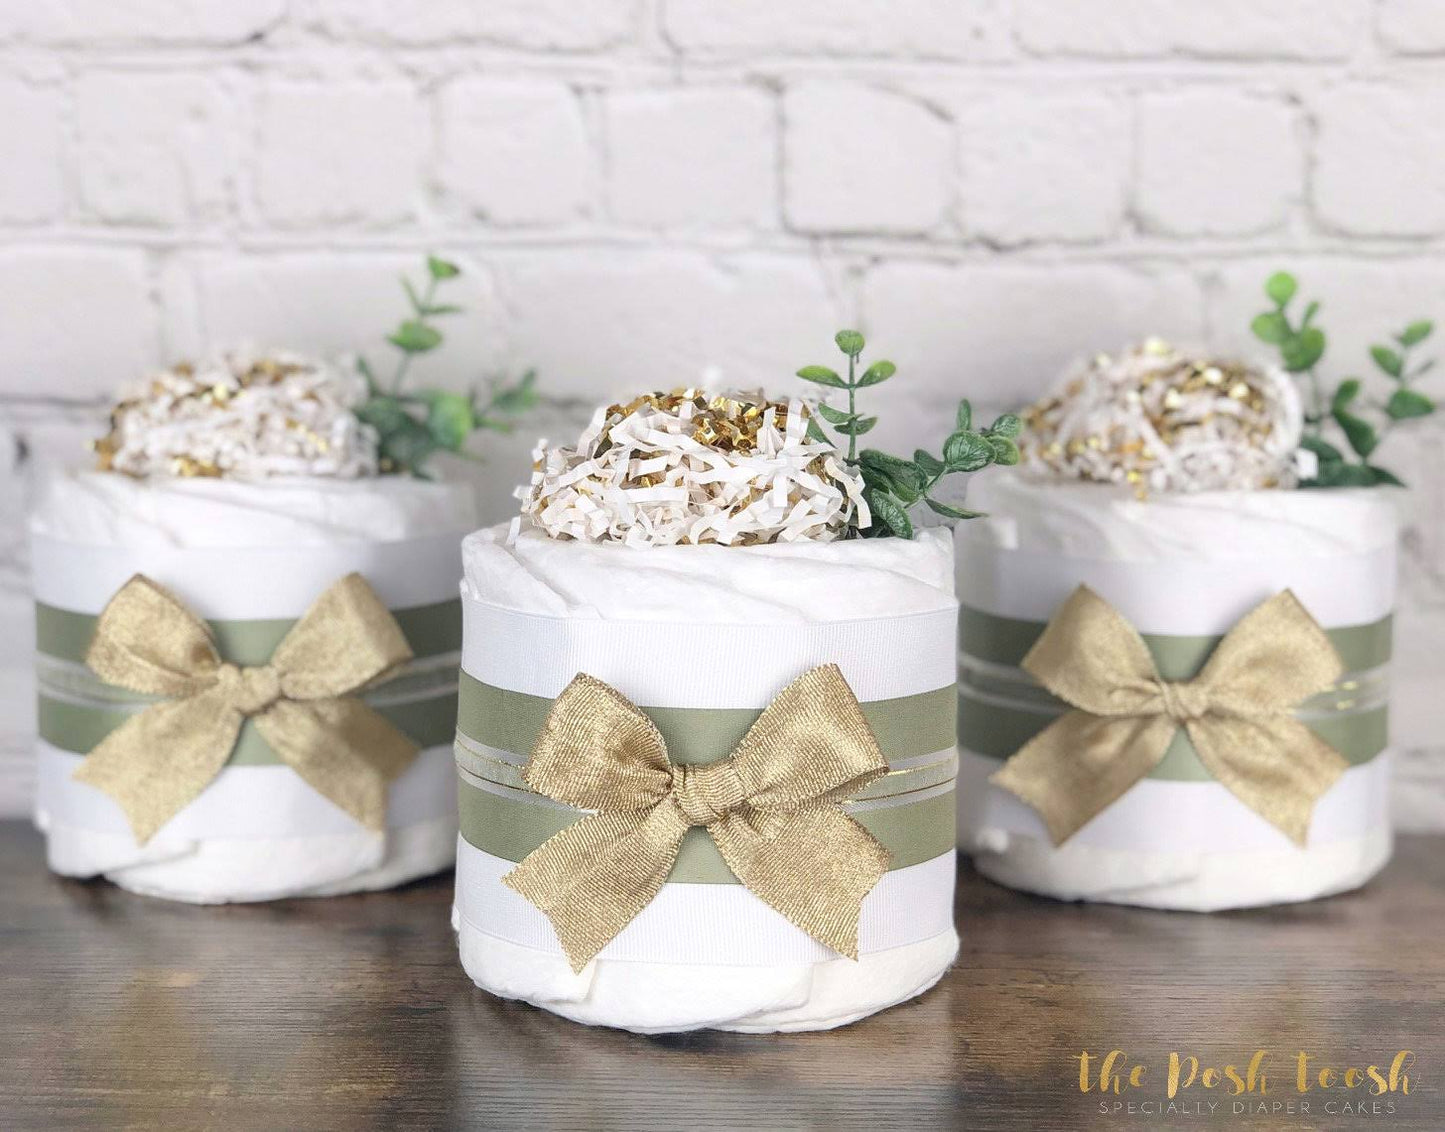 Diaper Cake Set Mini, Greenery White Gold Succulent Baby Shower Centerpiece, Gender Neutral Natural Chic Baby Shower Decor Gift